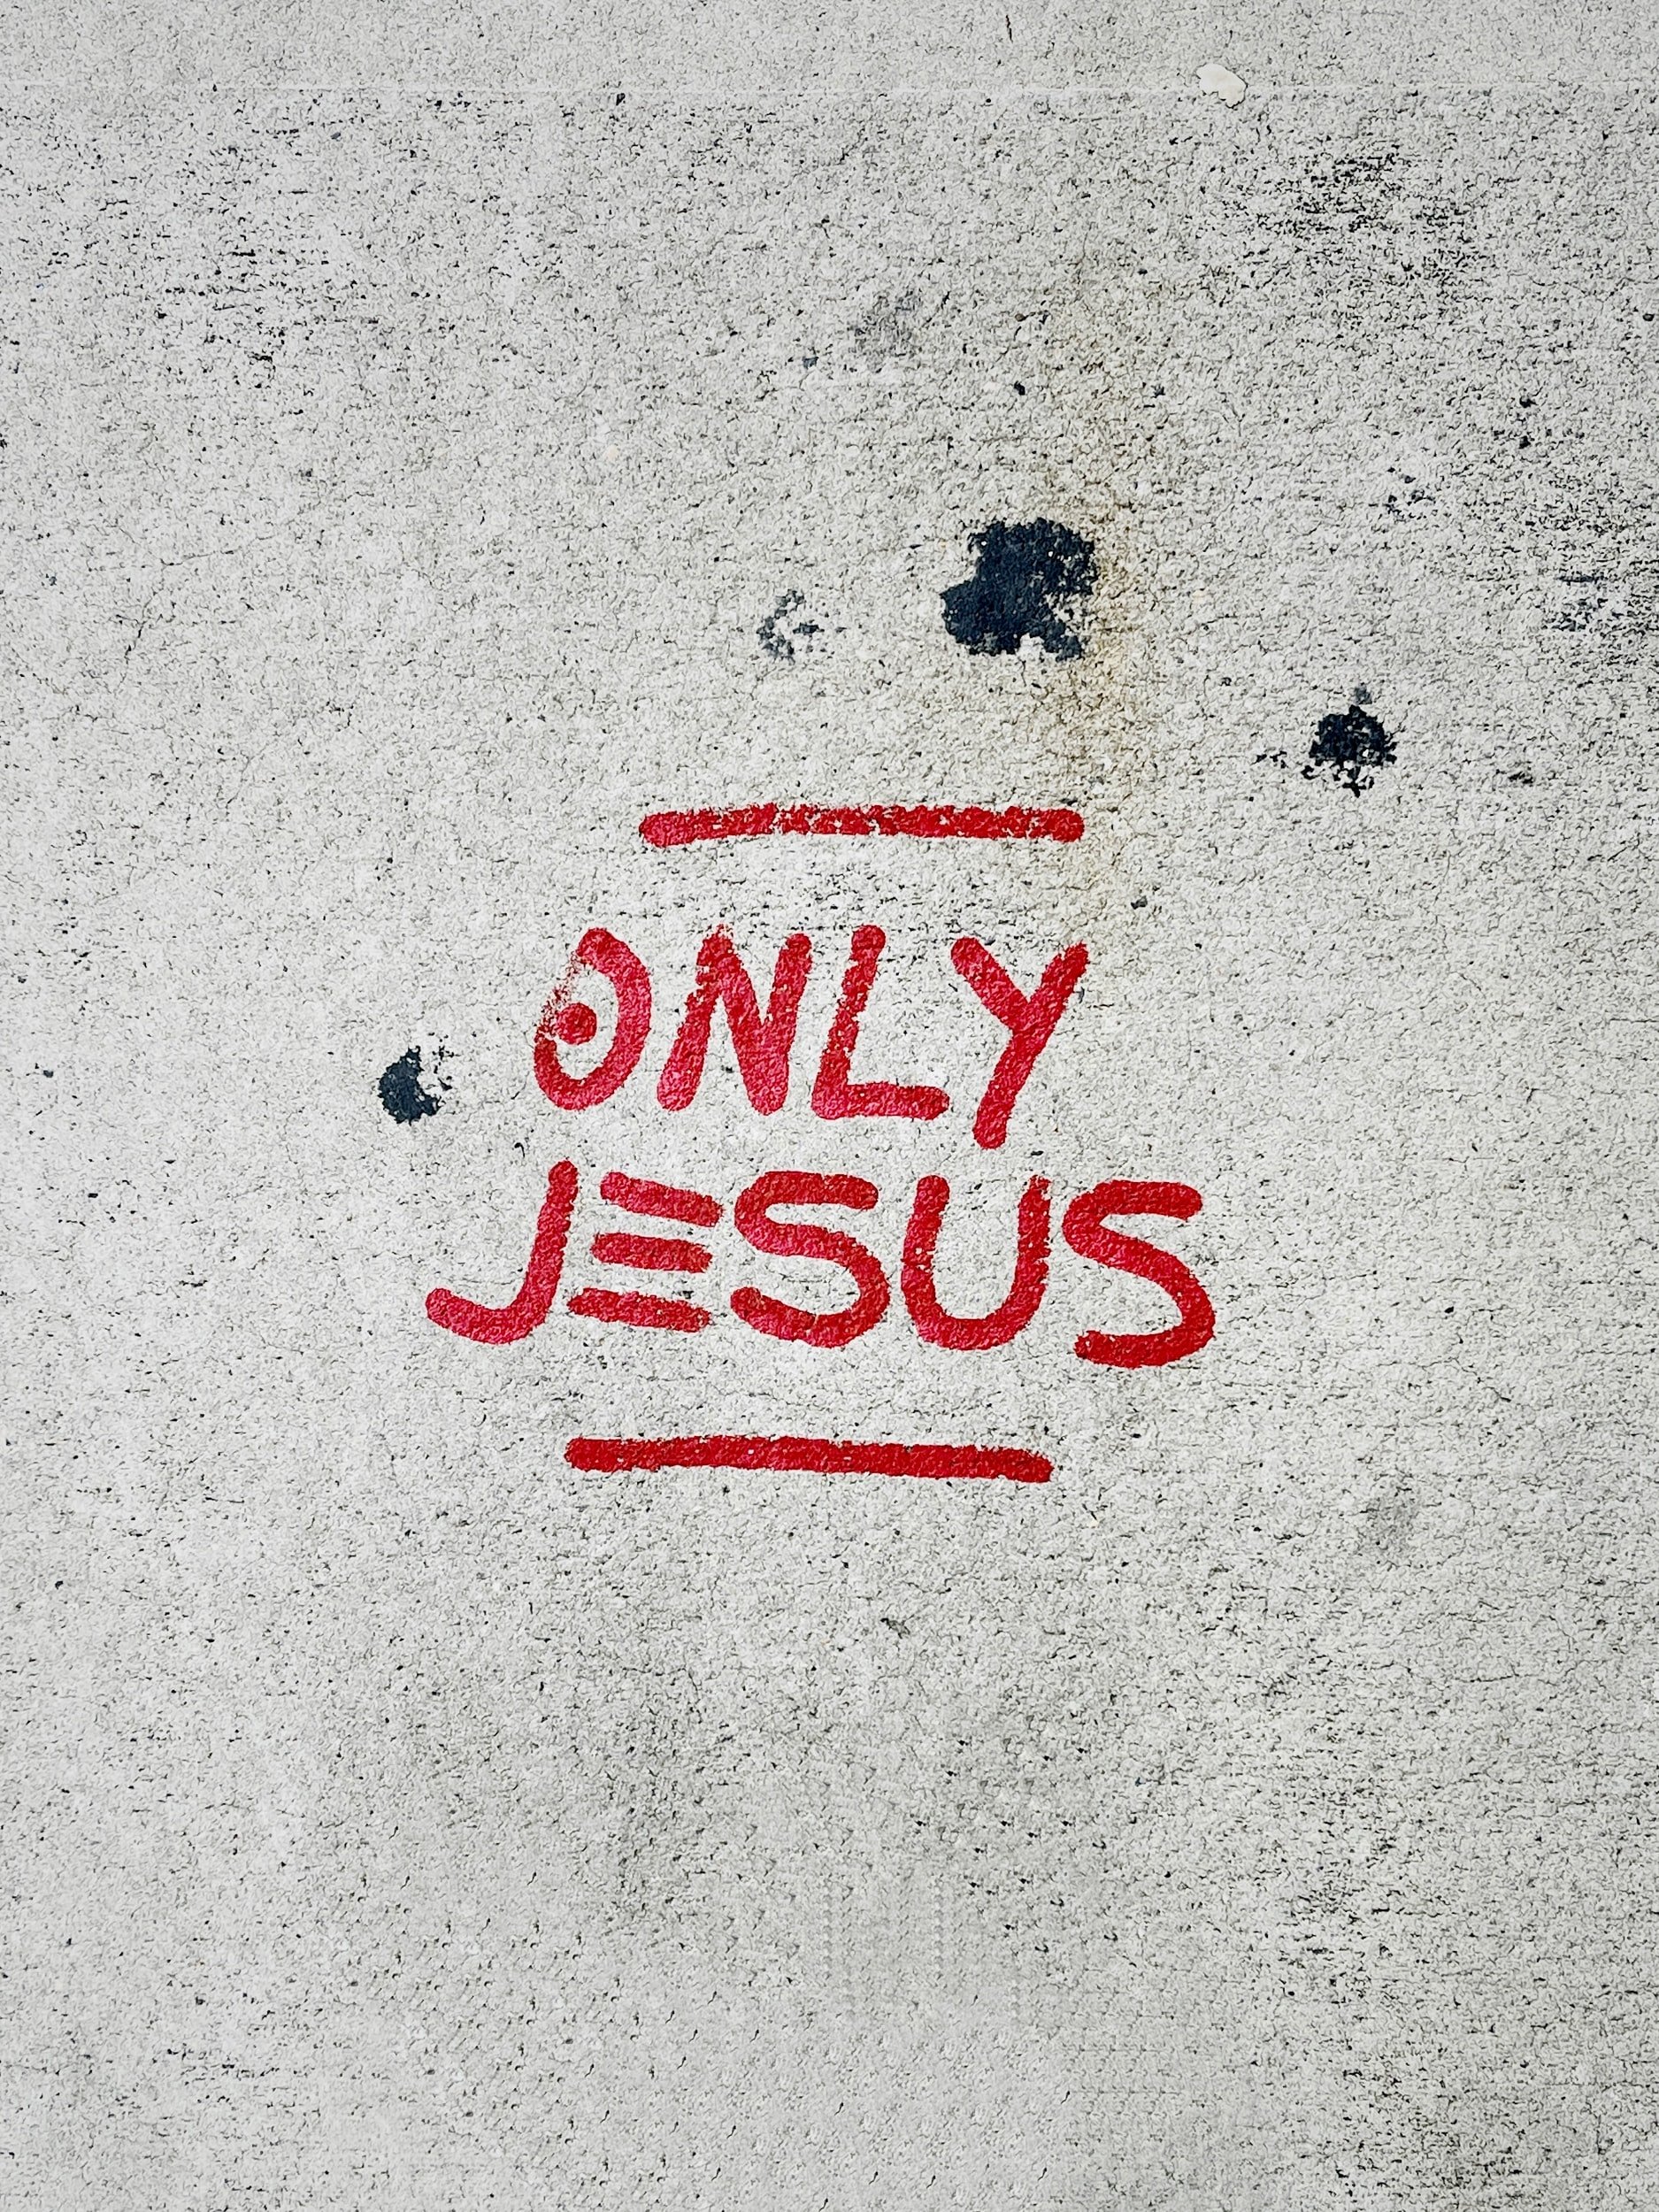 Only Jesus in red spray paint on concrete